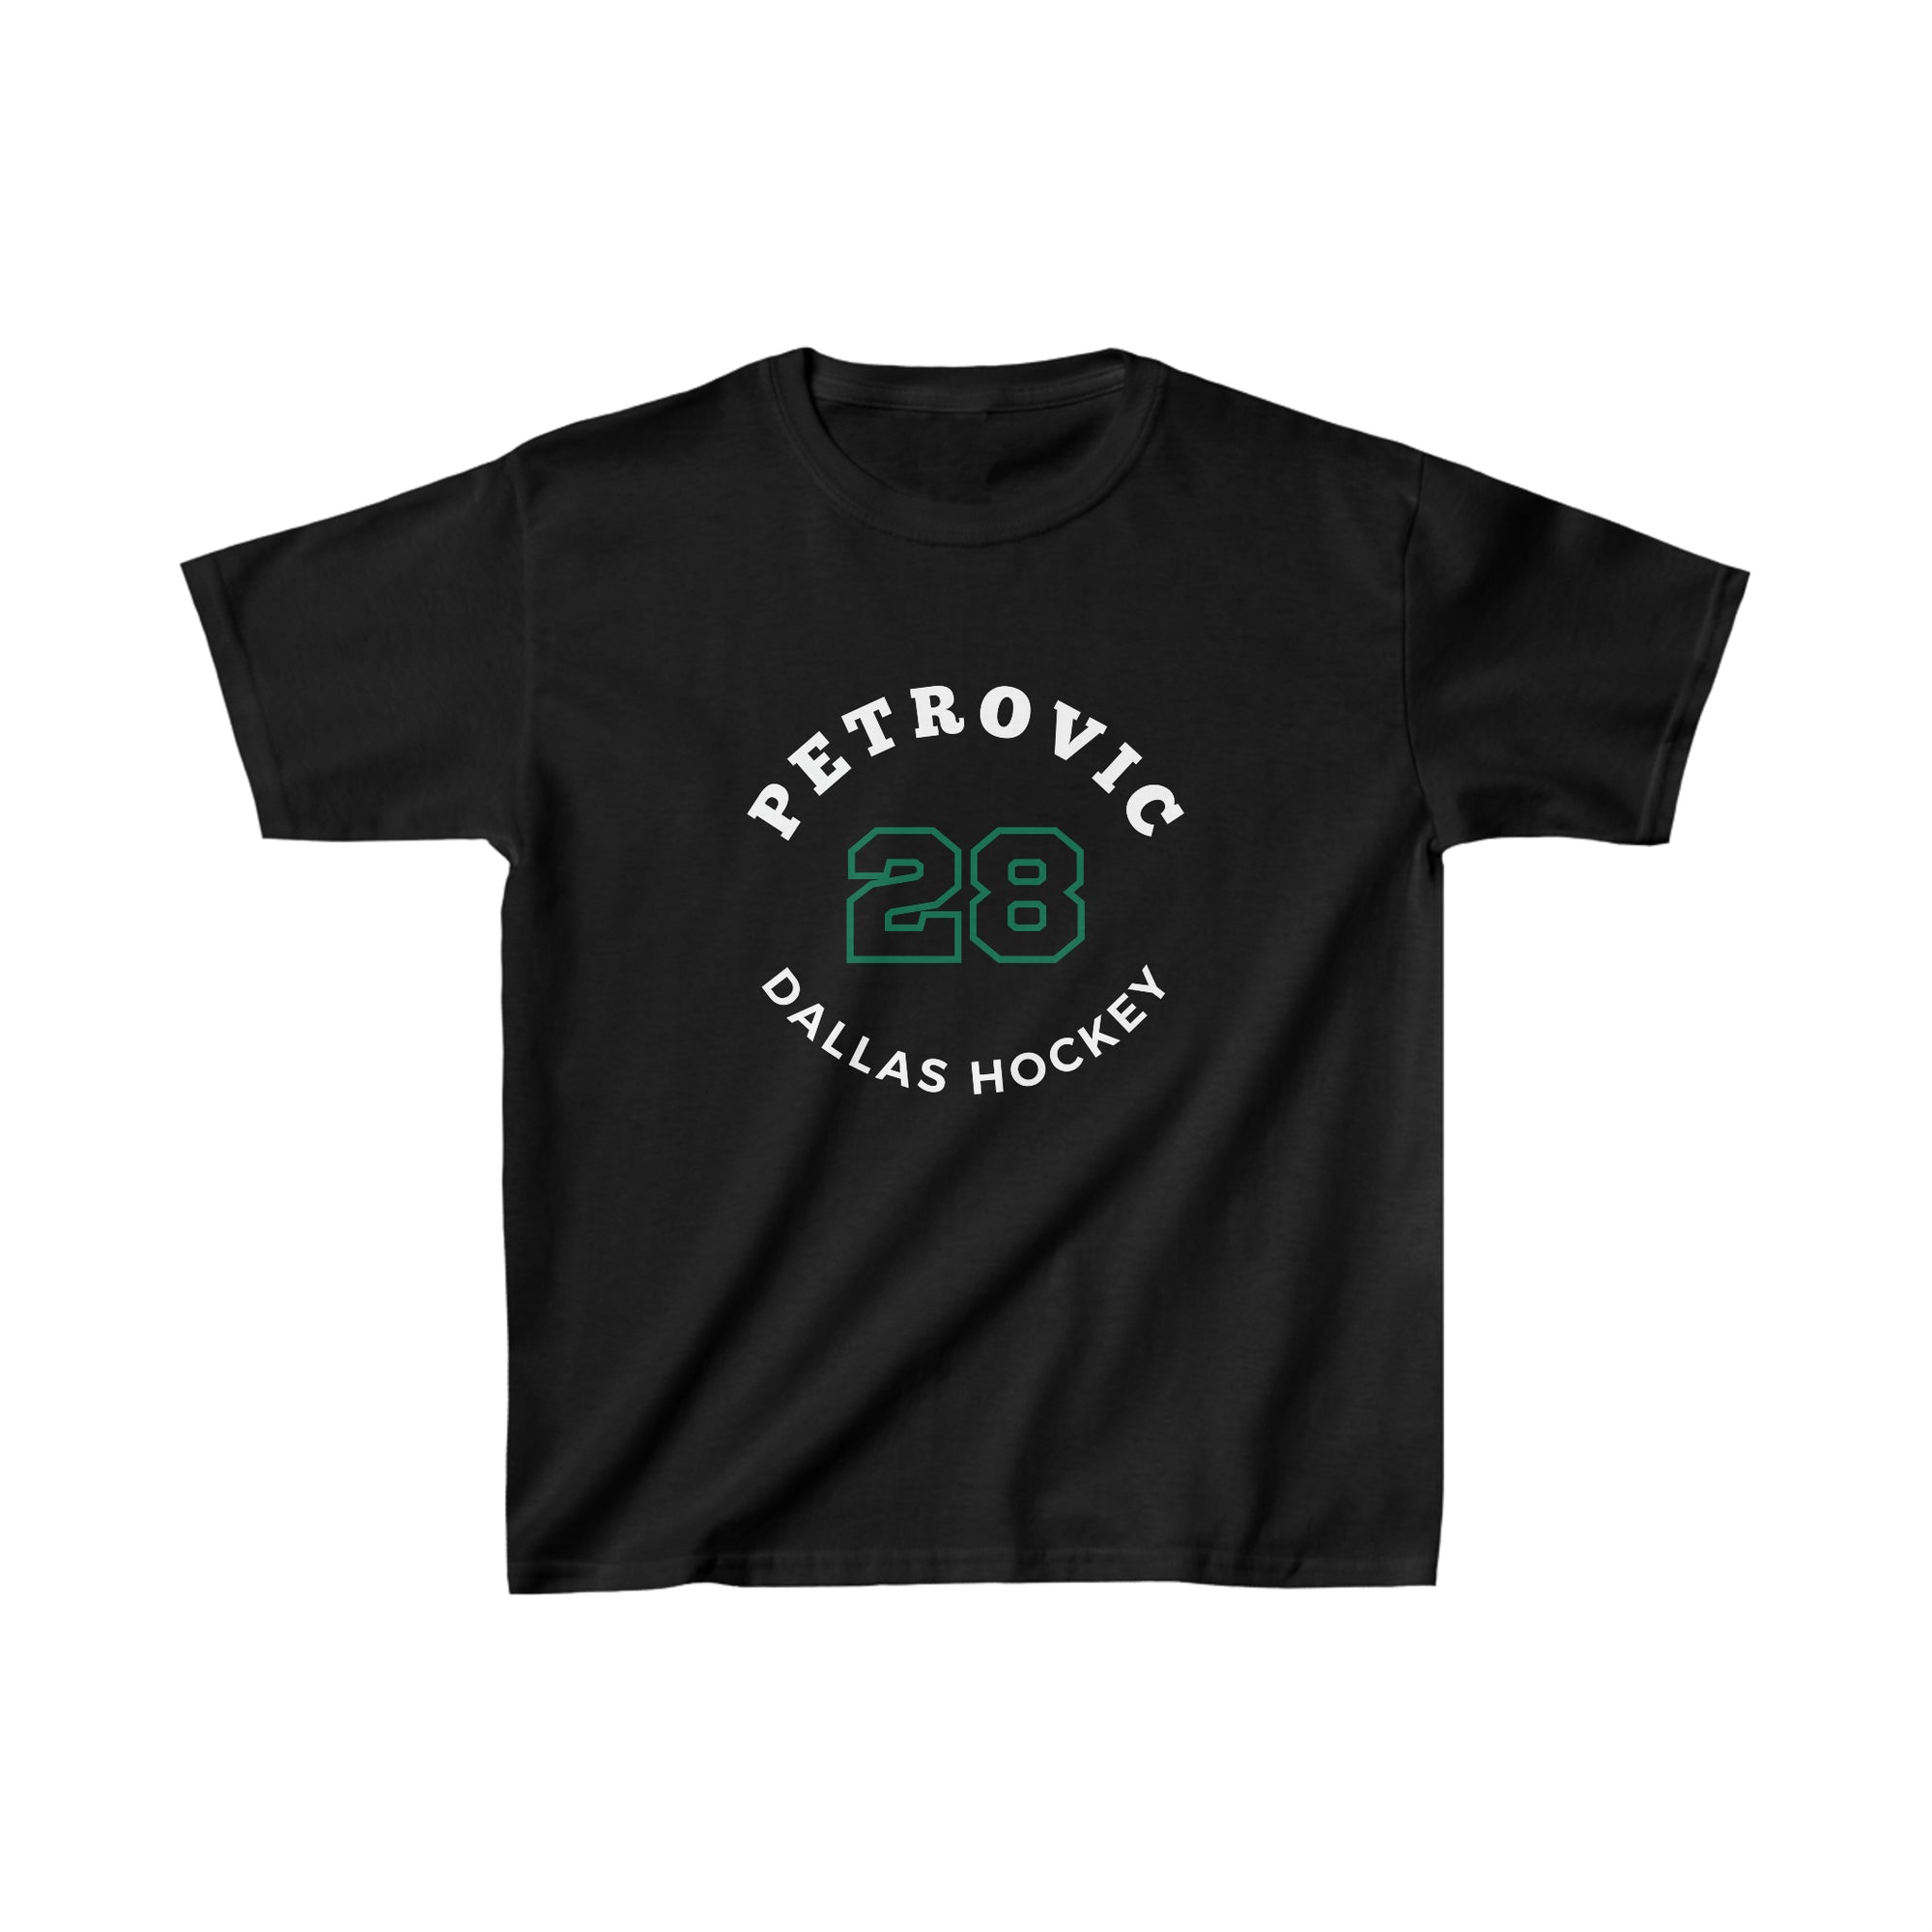 Petrovic 28 Dallas Hockey Number Arch Design Kids Tee